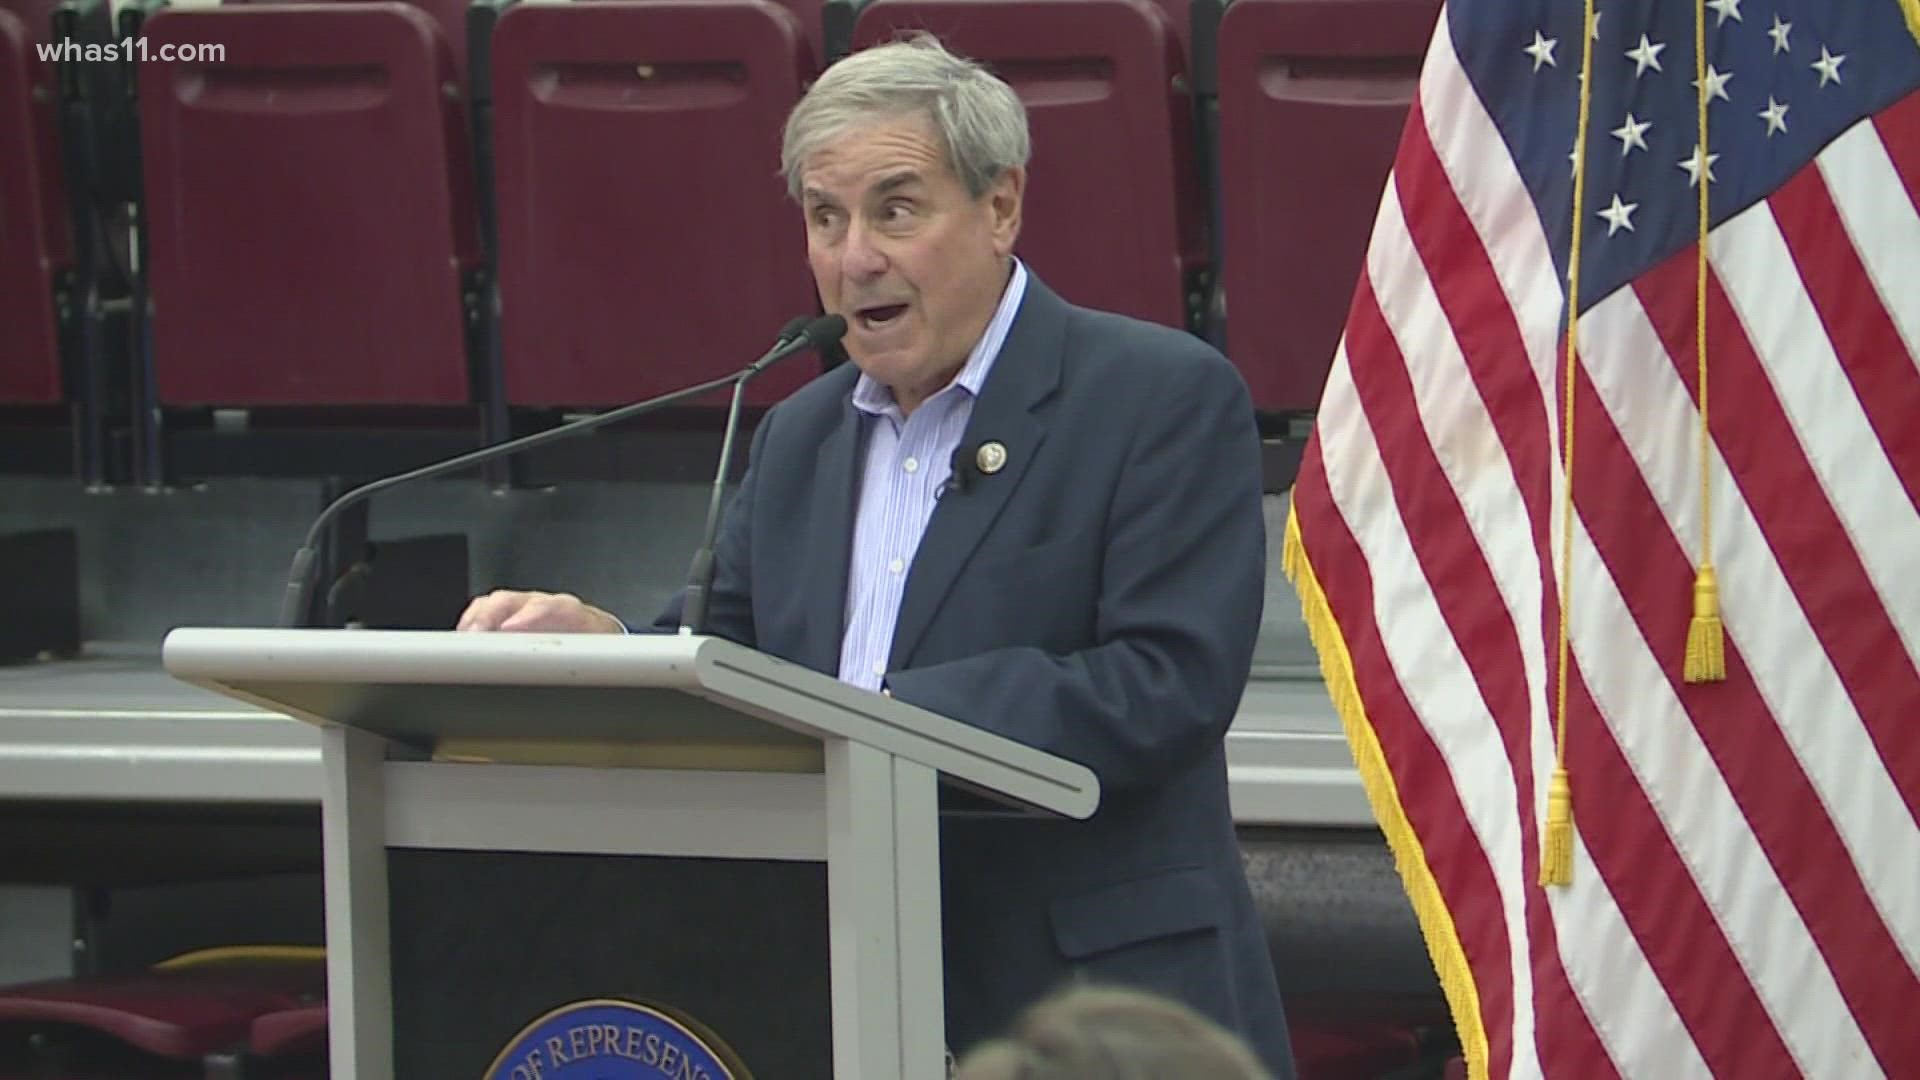 Representative John Yarmuth announced Tuesday that he will not run for re-election when his term ends in 2023.